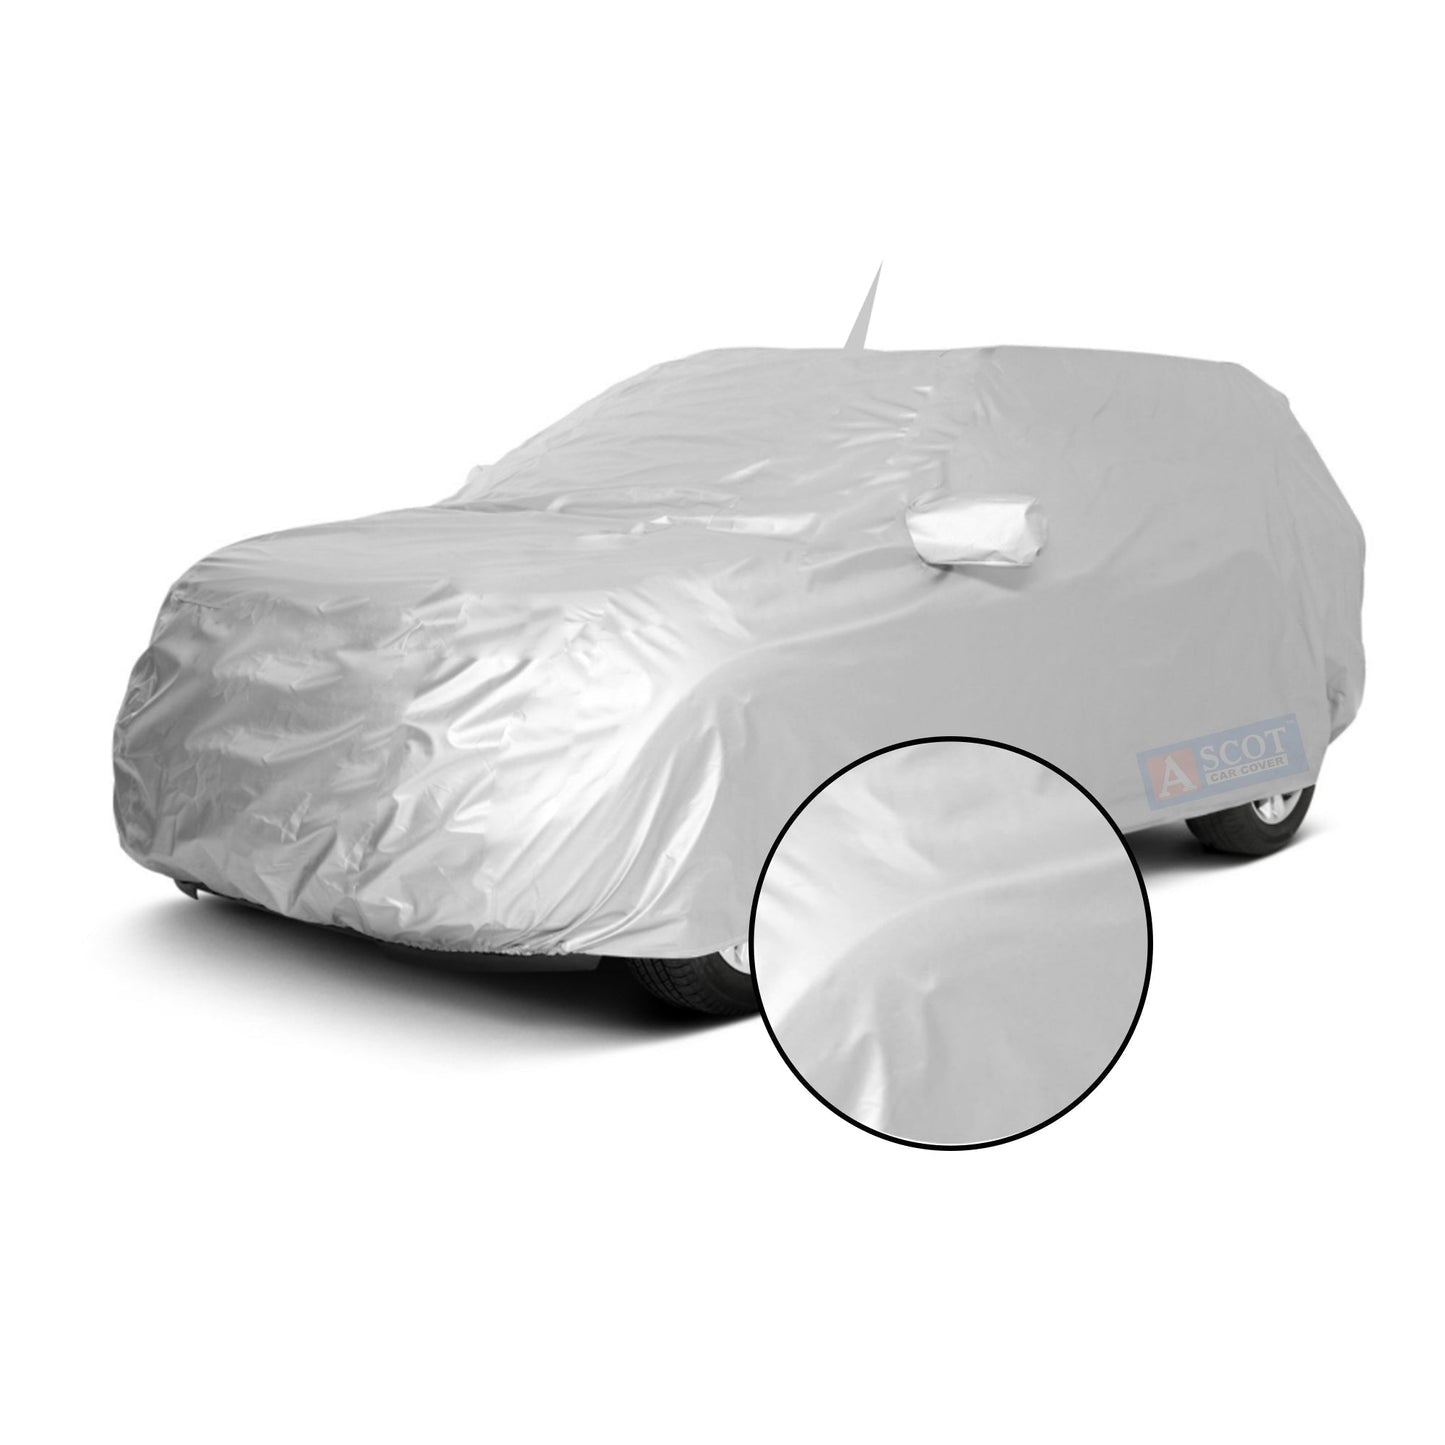 Ascot Nissan Micra Car Body Cover Dust Proof, Trippel Stitched